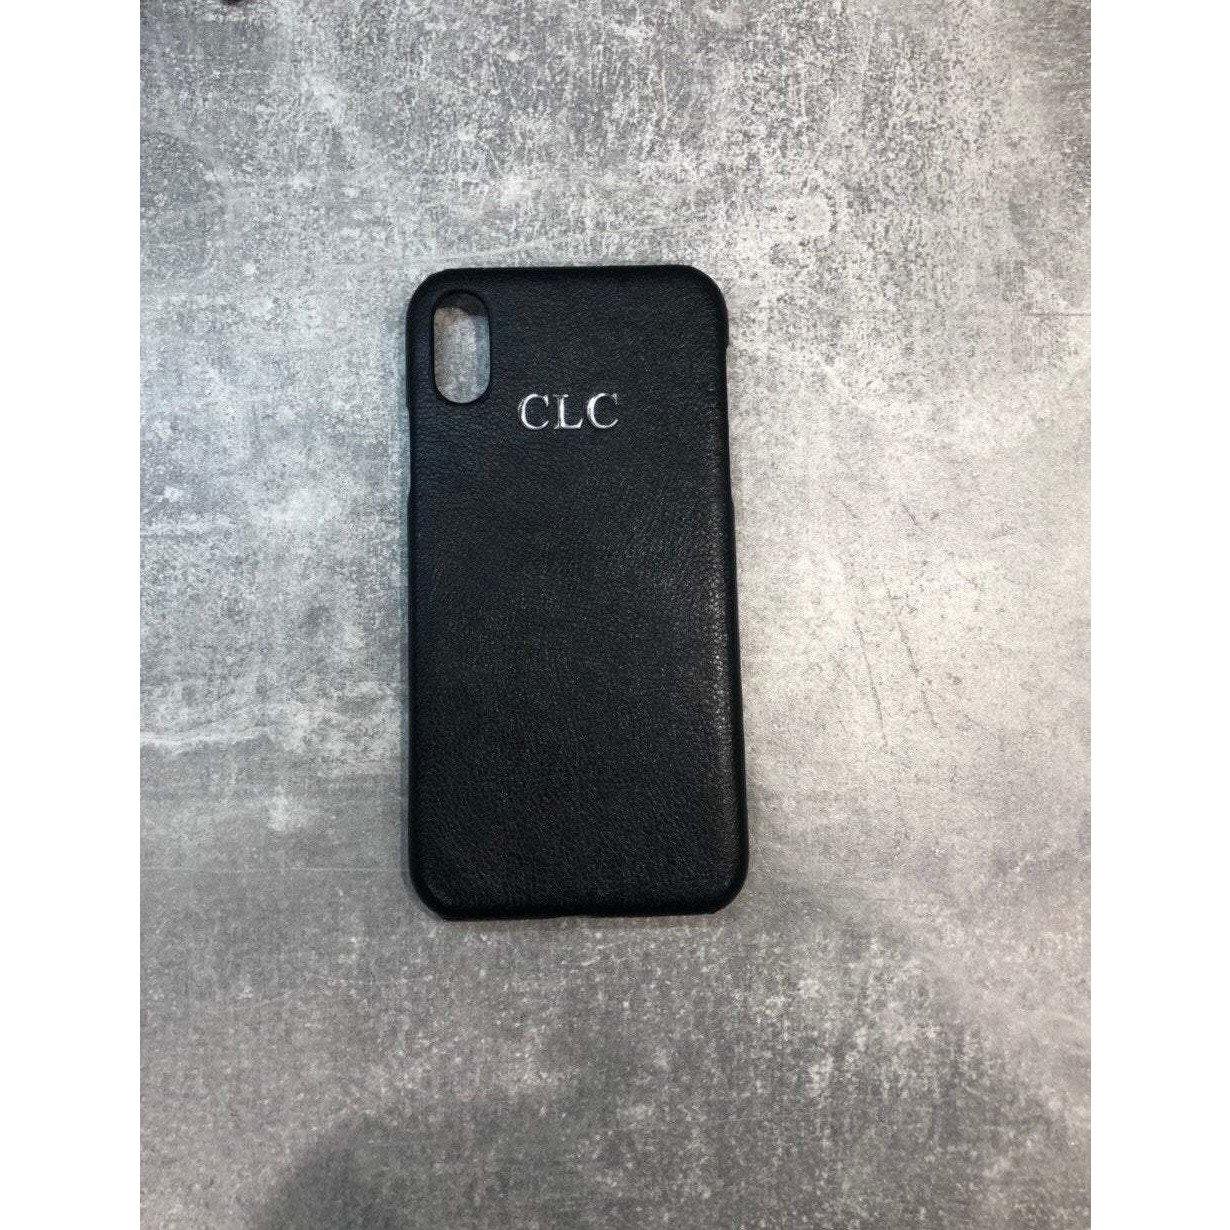 iPhone XR pu leather case personalised with name or initials - PersonalisebyLisa